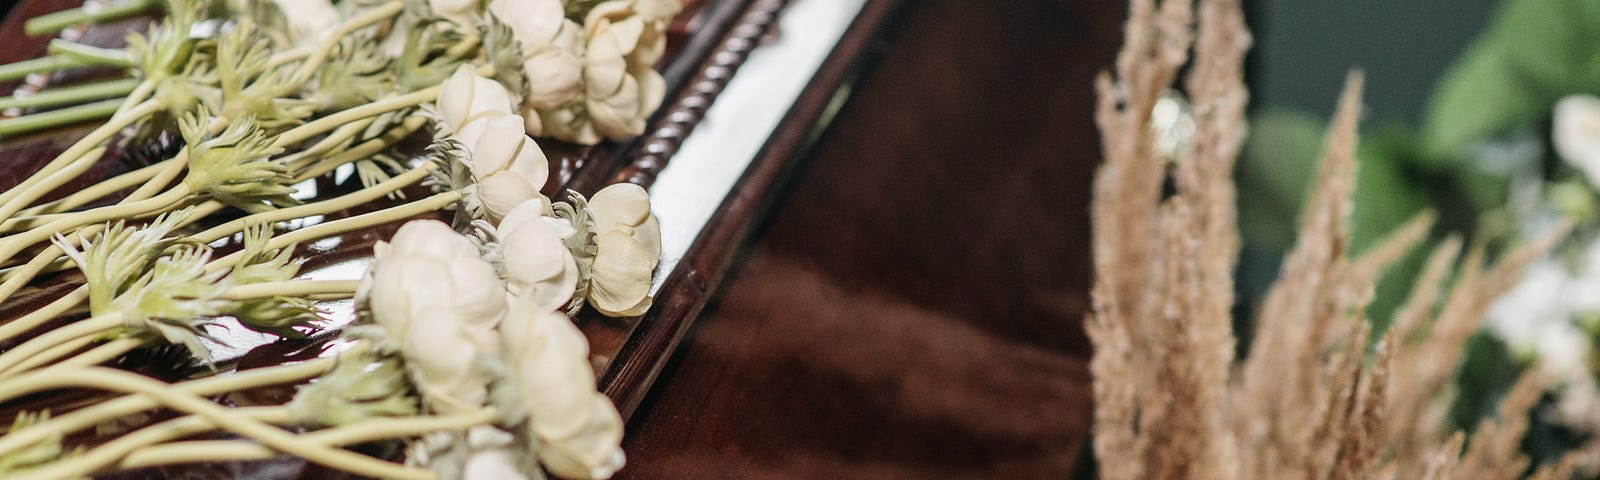 white flowers on wooden coffin